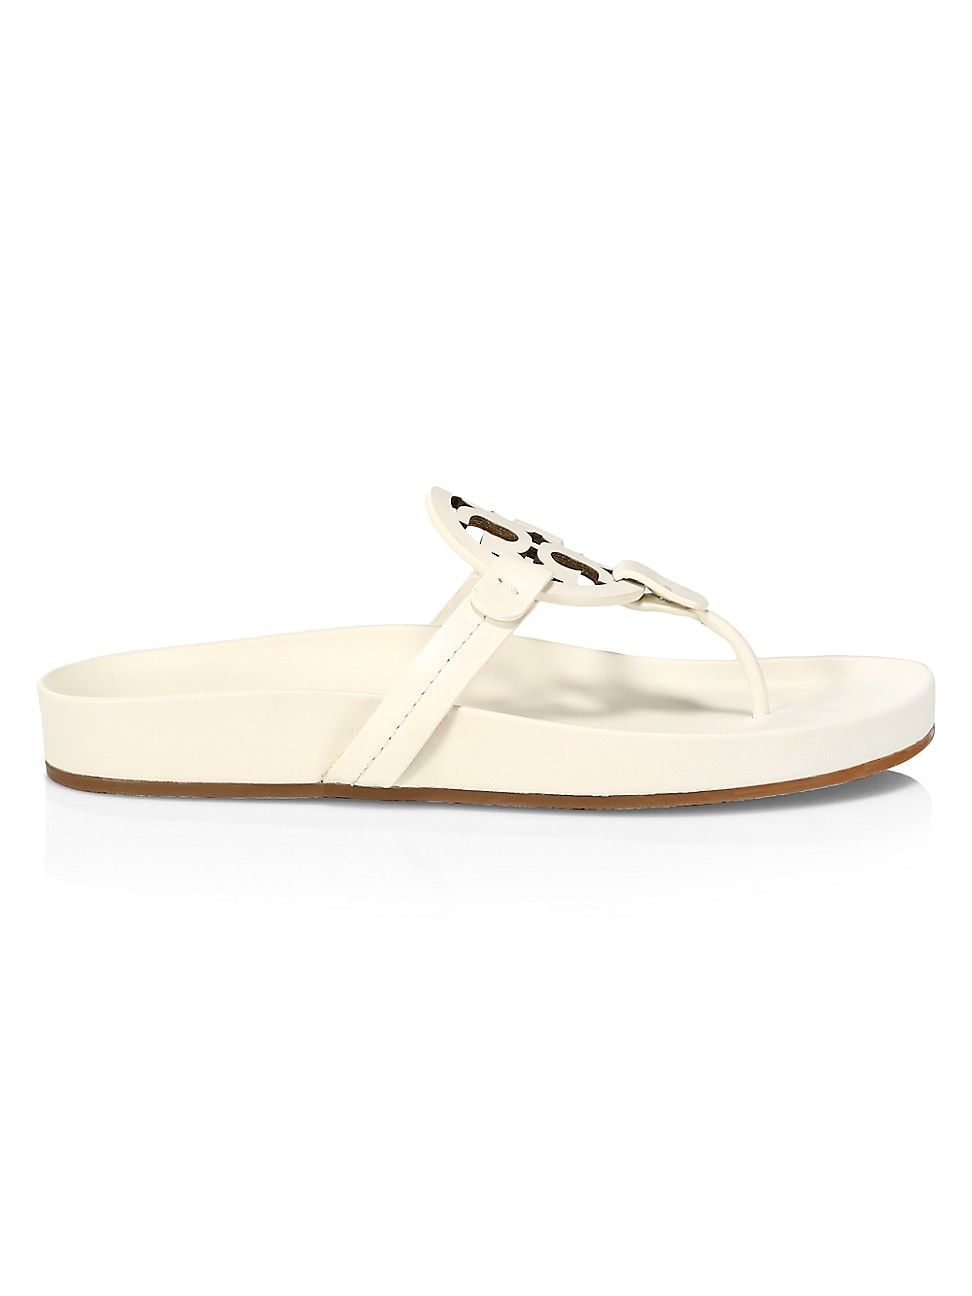 Tory Burch Women's Miller Cloud Leather Thong Slides - New Ivory - Size 6 Sandals | Saks Fifth Avenue